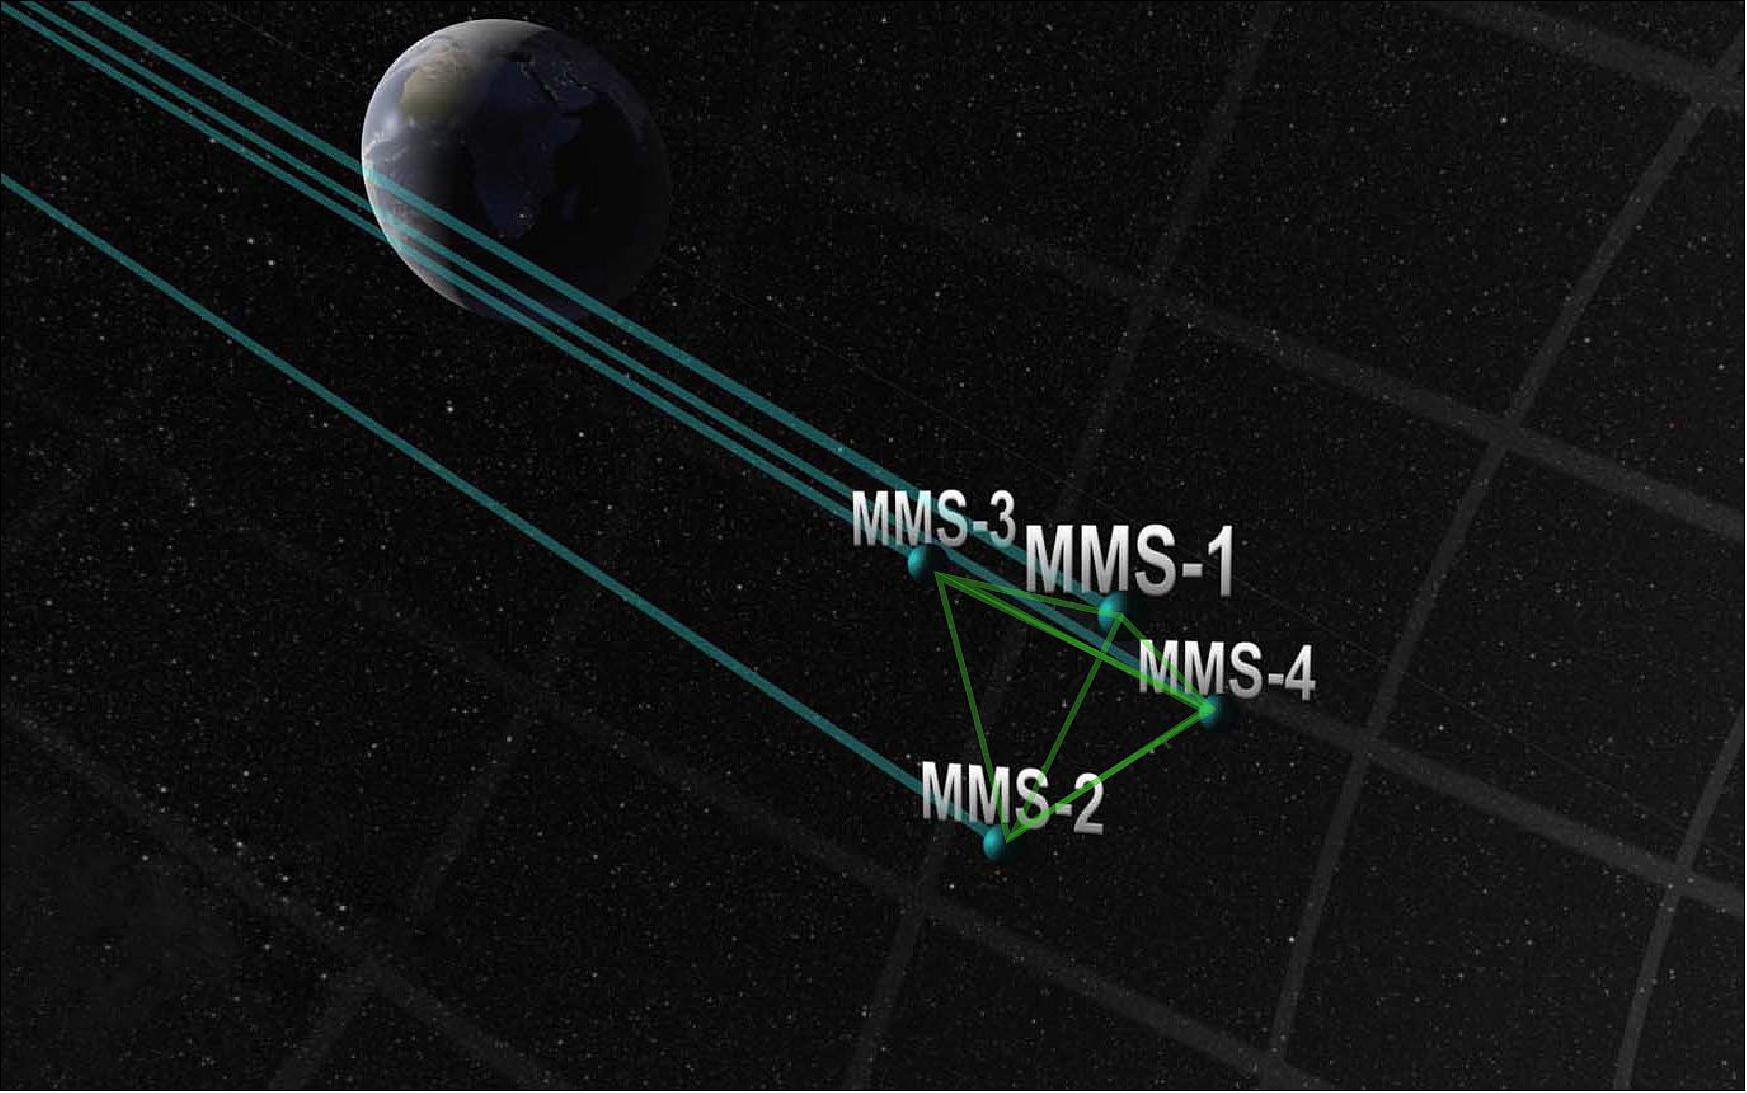 Figure 43: This image shows the pyramid-shaped formation of the four MMS spacecraft (image credit: NASA)